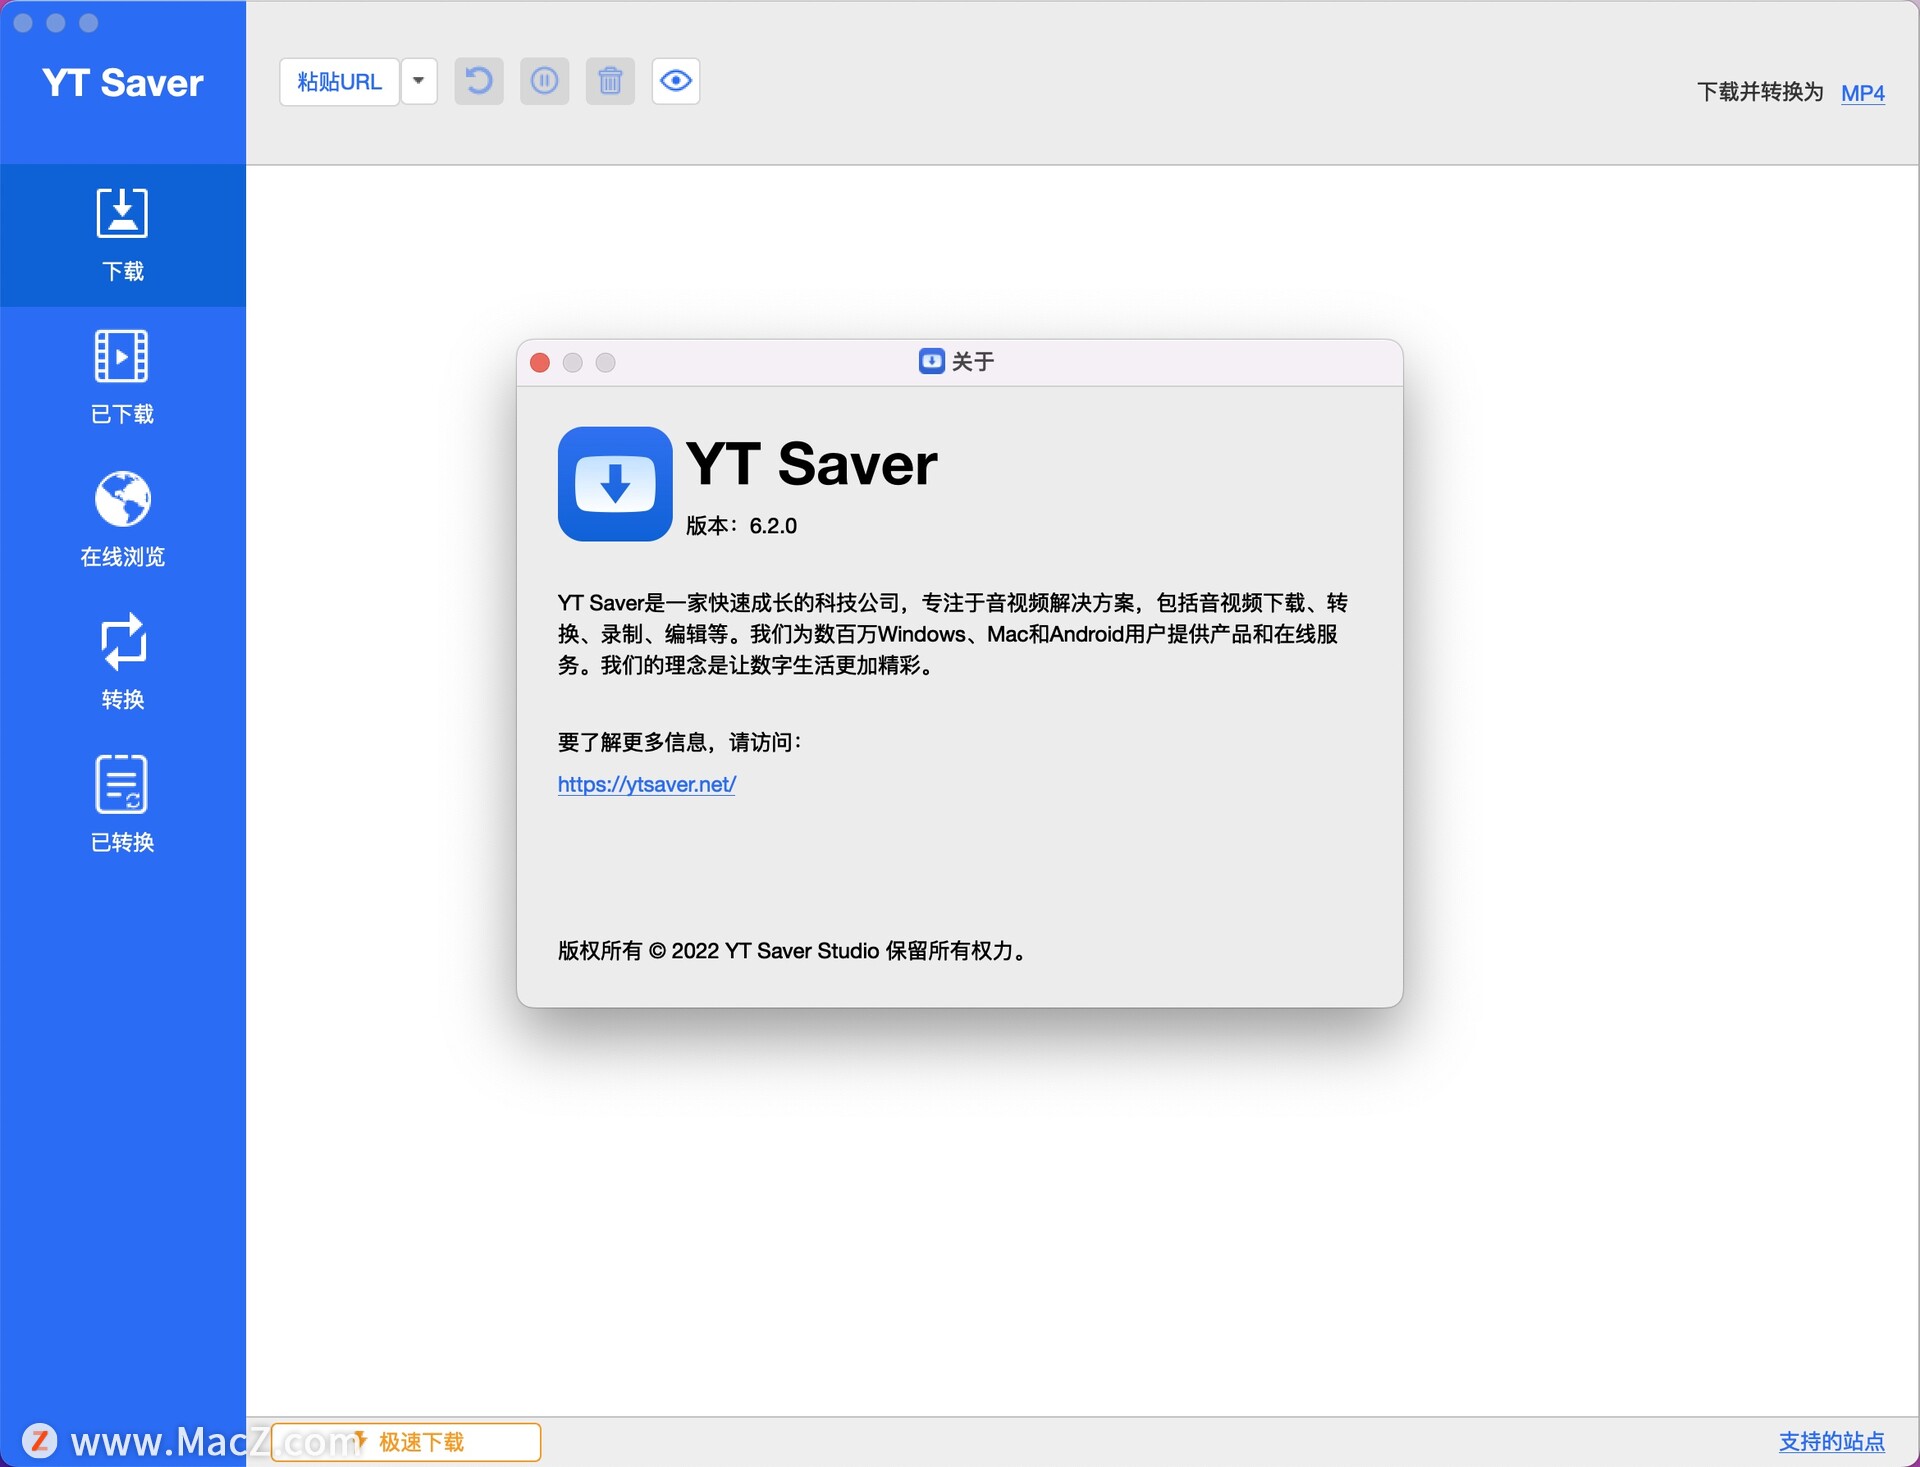 YT Saver 7.0.2 instal the new